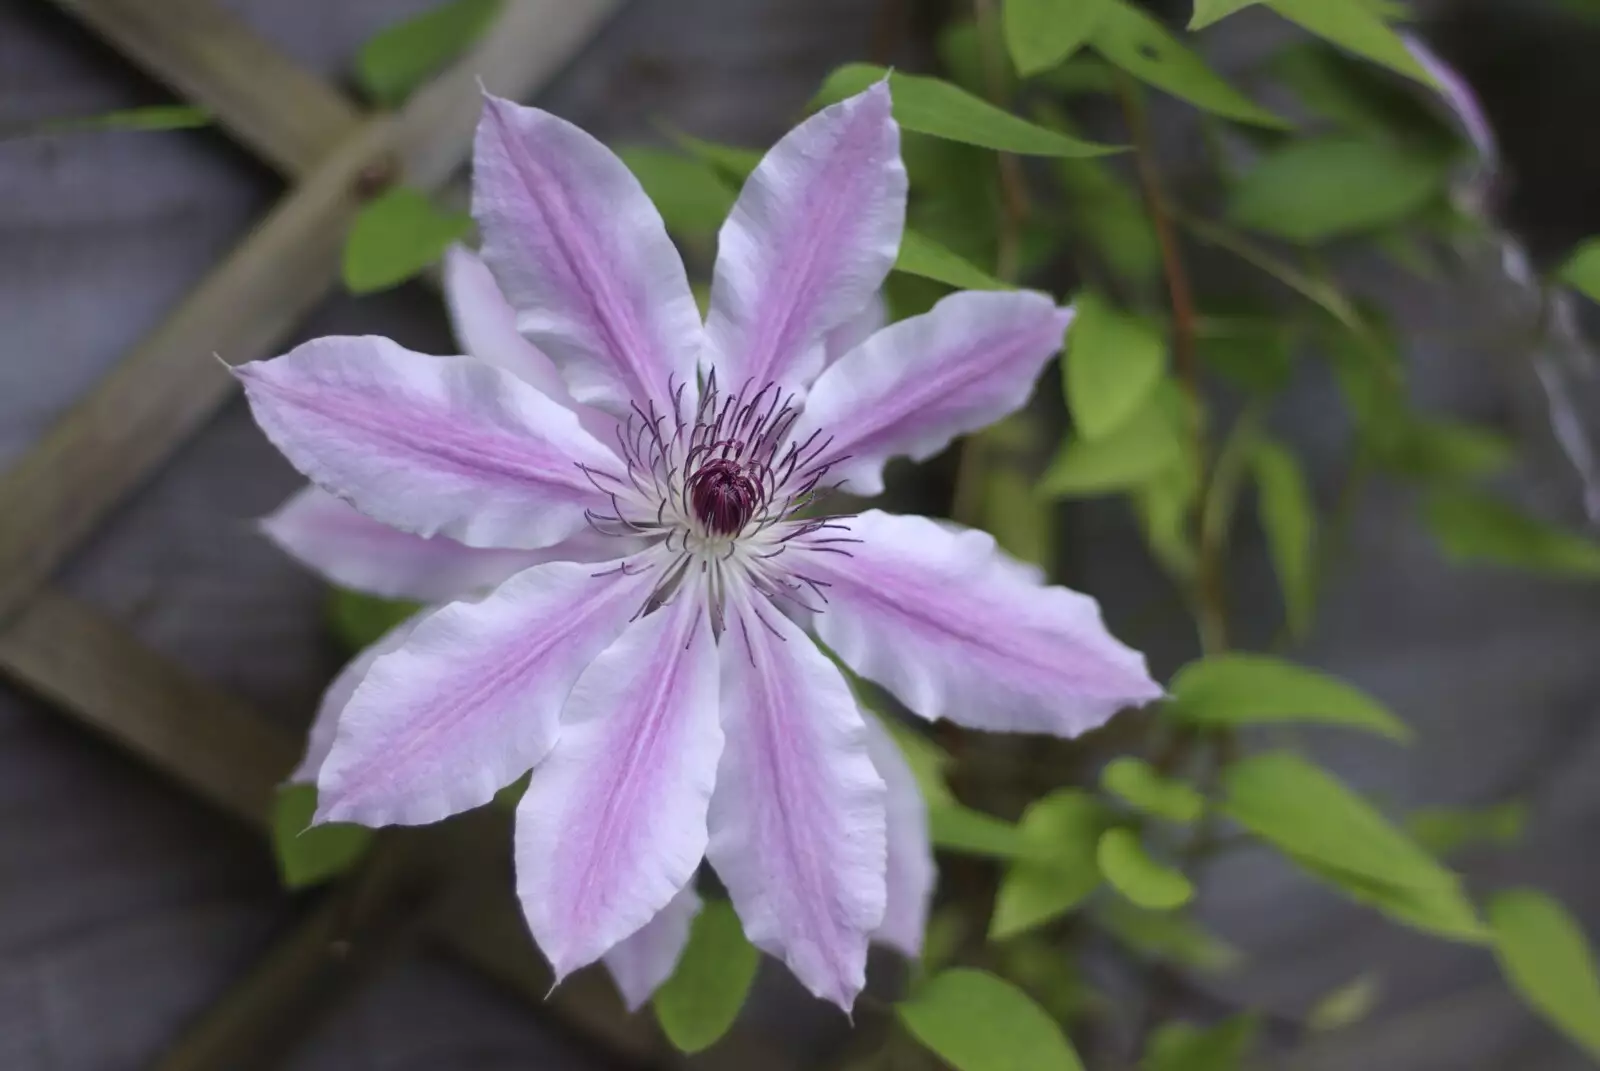 A nicely-open clematis flower, from May Miscellany: London, Louise's Birthday, Norwich, and Steve Winwood, Islington and Cambridge - May 2007